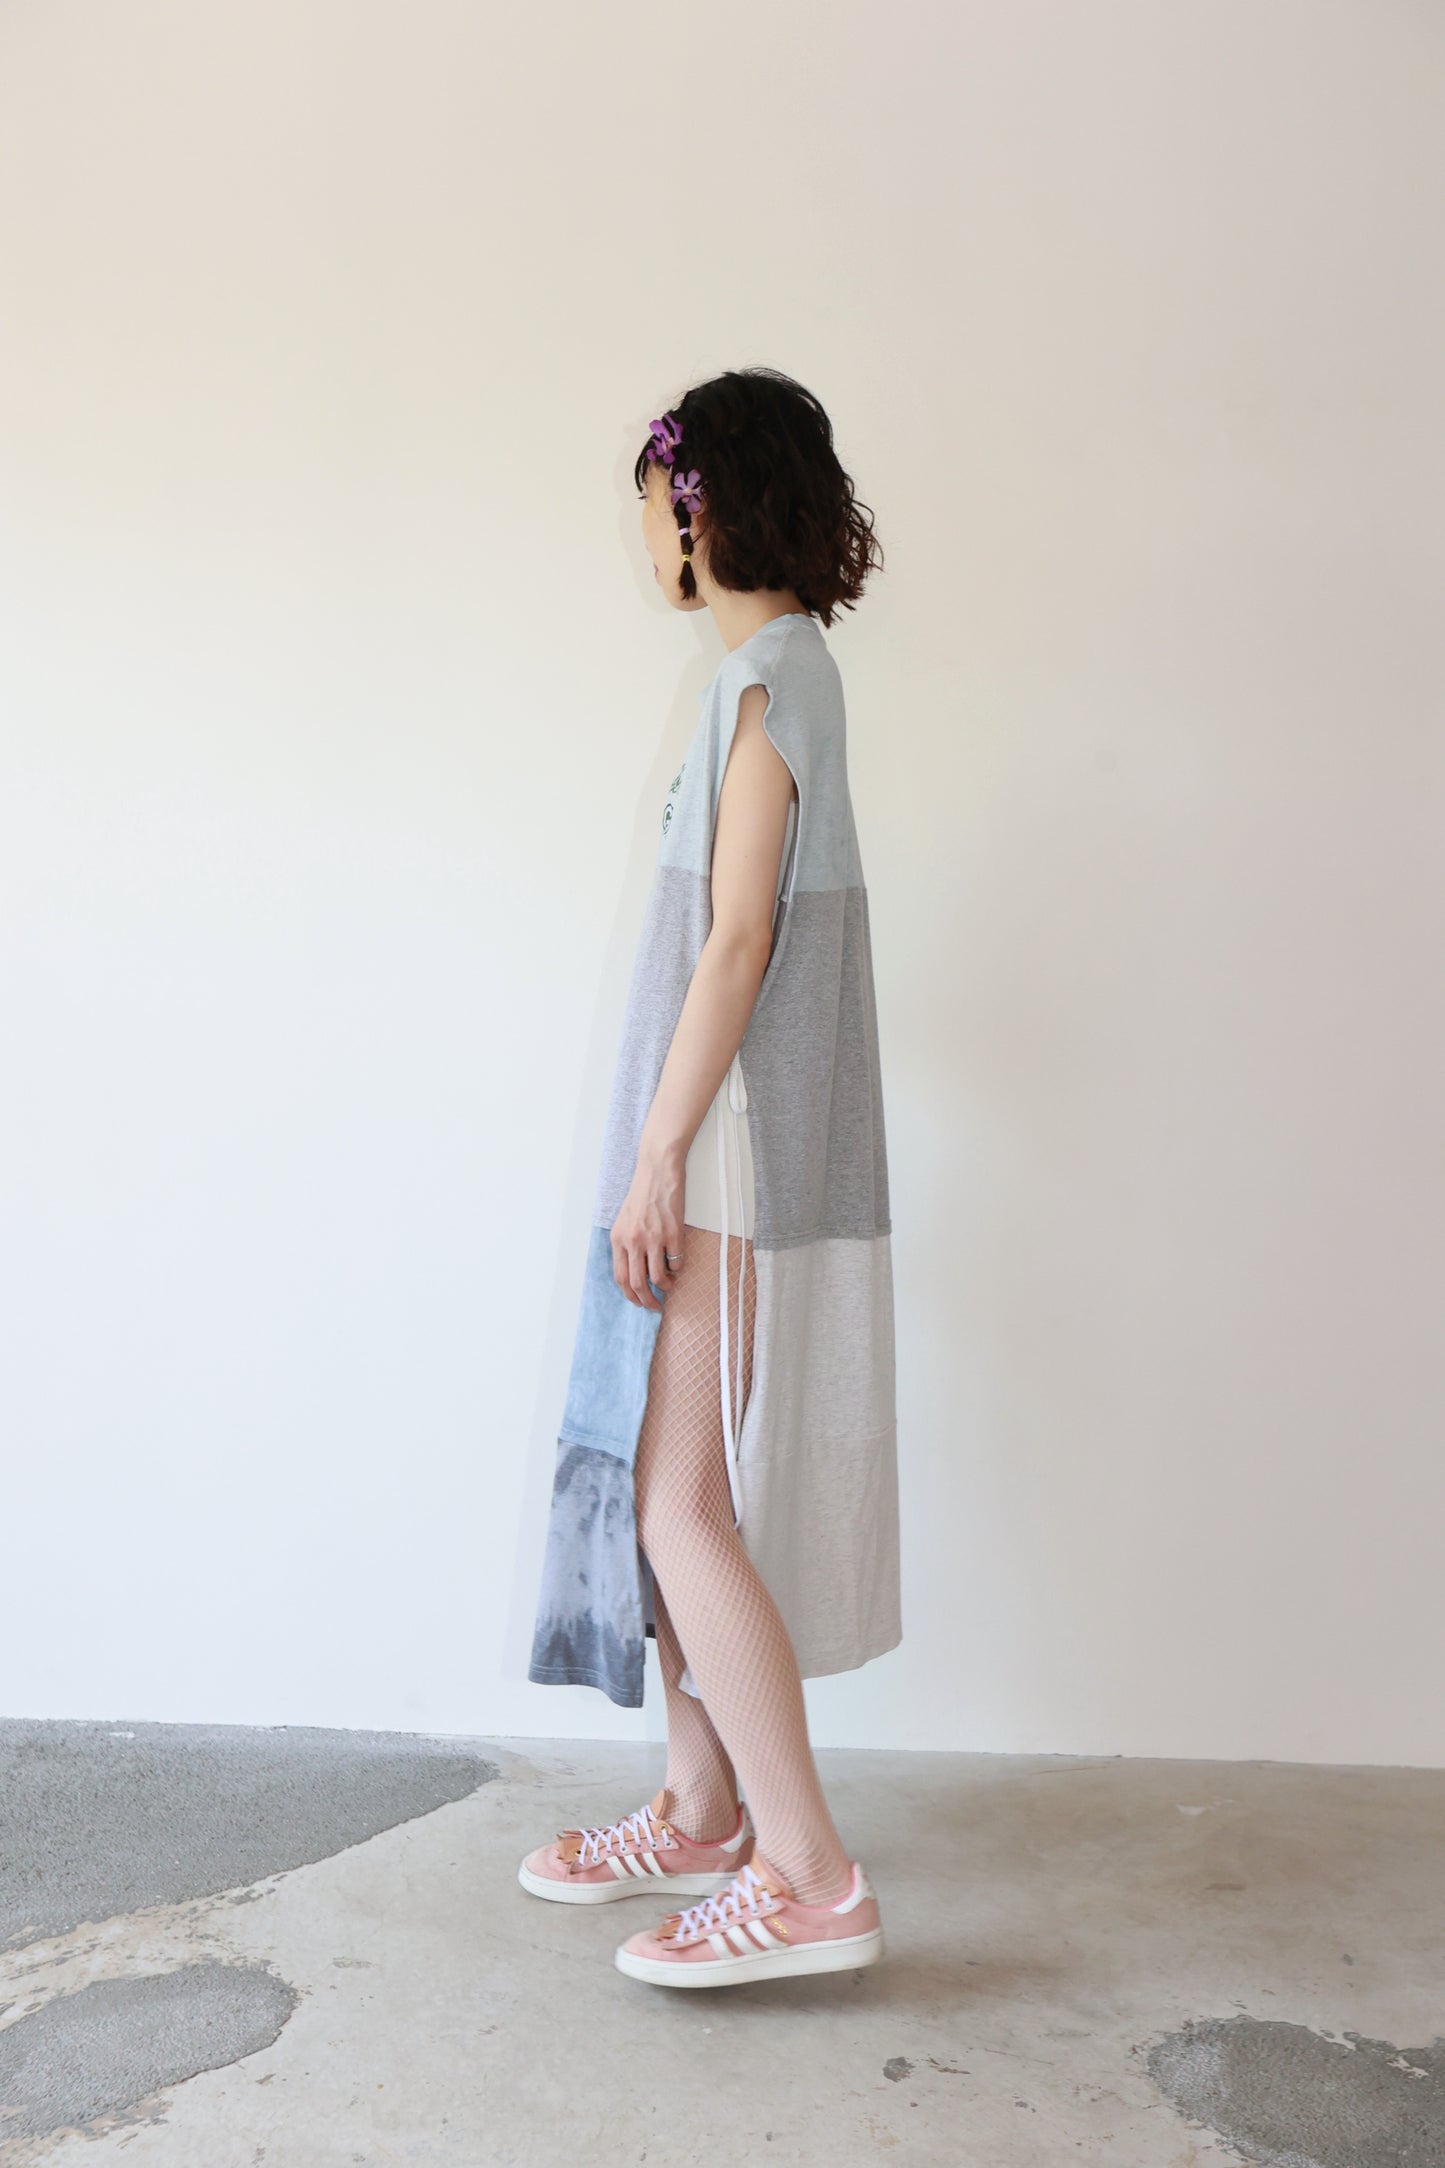 POTTOxUDW UP-CYCLED PIGMENT-DYED SIDE OPEN ONE-PIECE DRESS, CARE